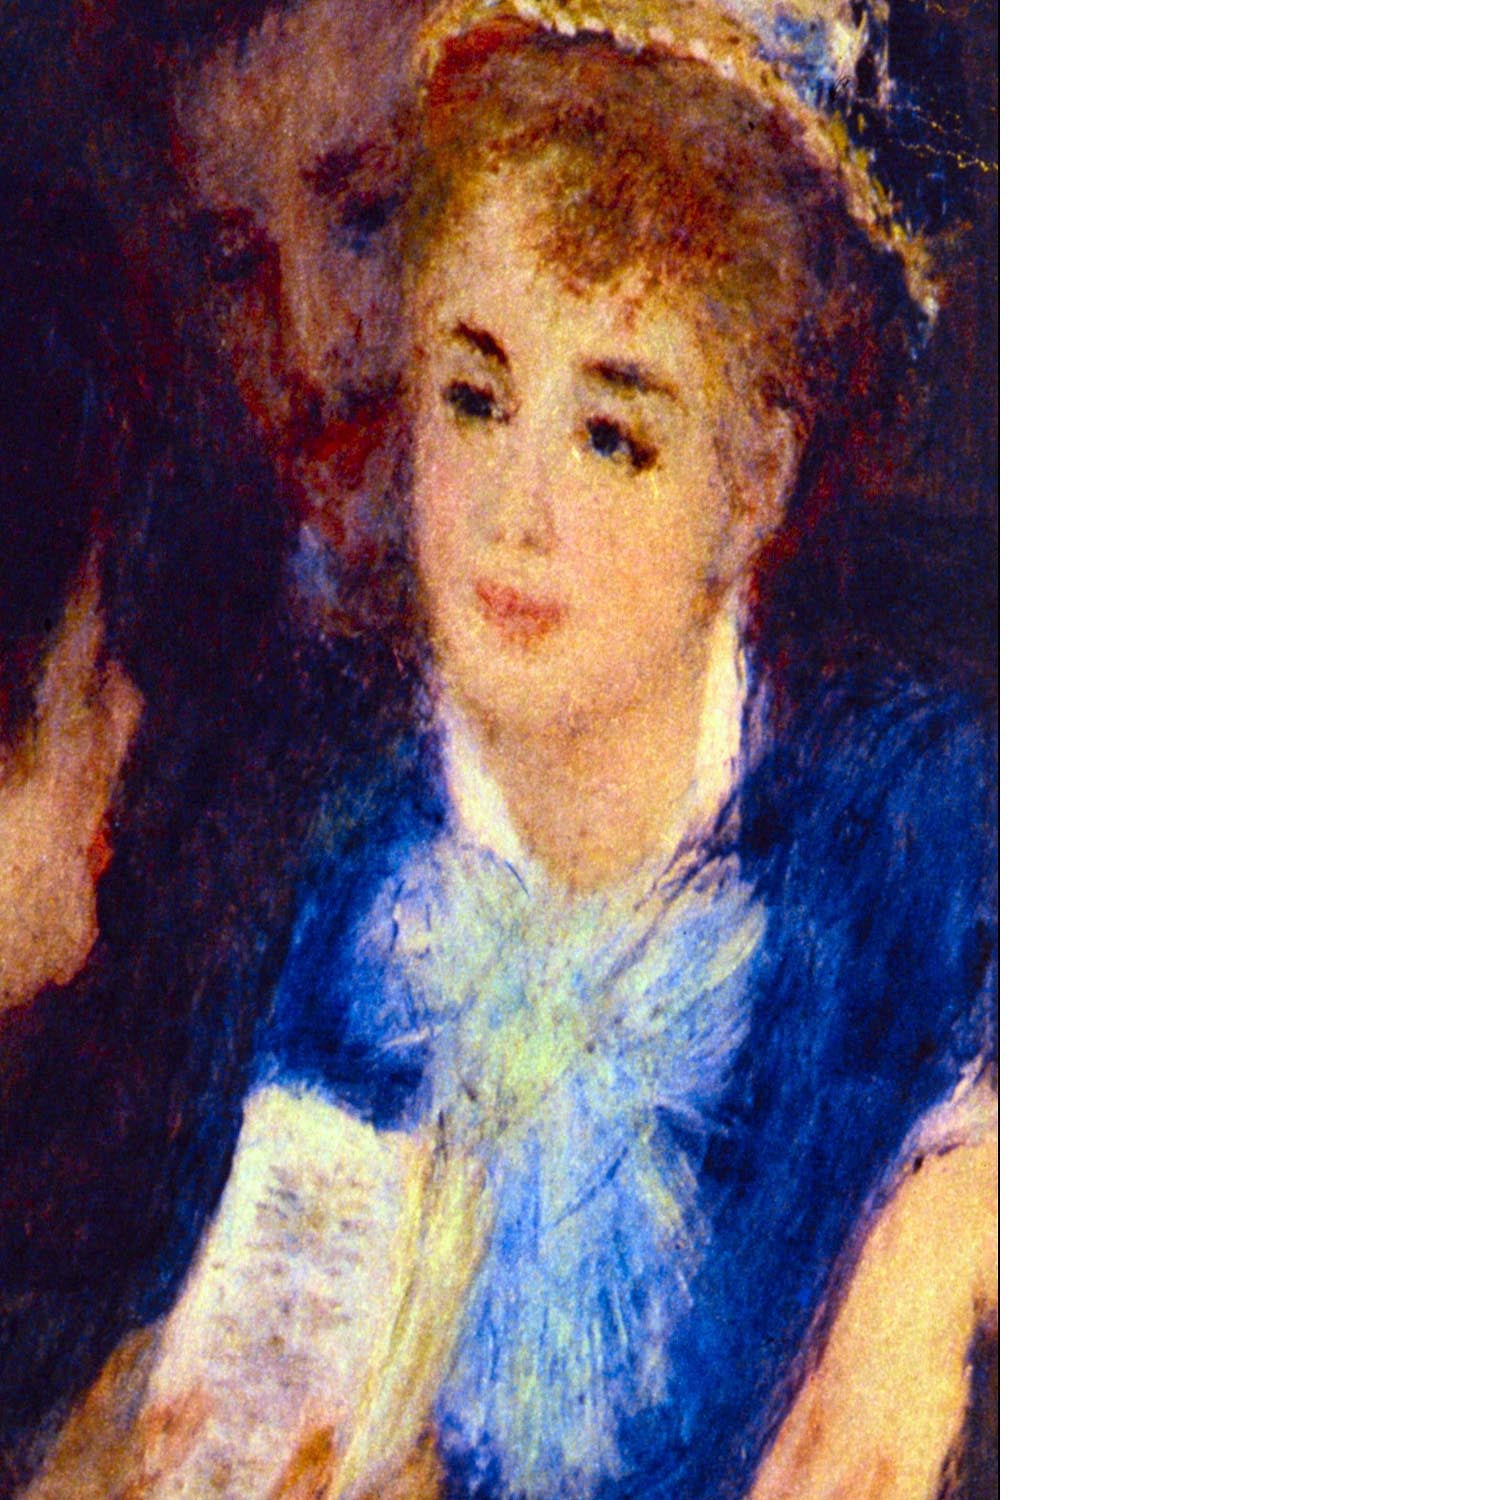 The Perusal of the Part by Renoir Floating Framed Canvas